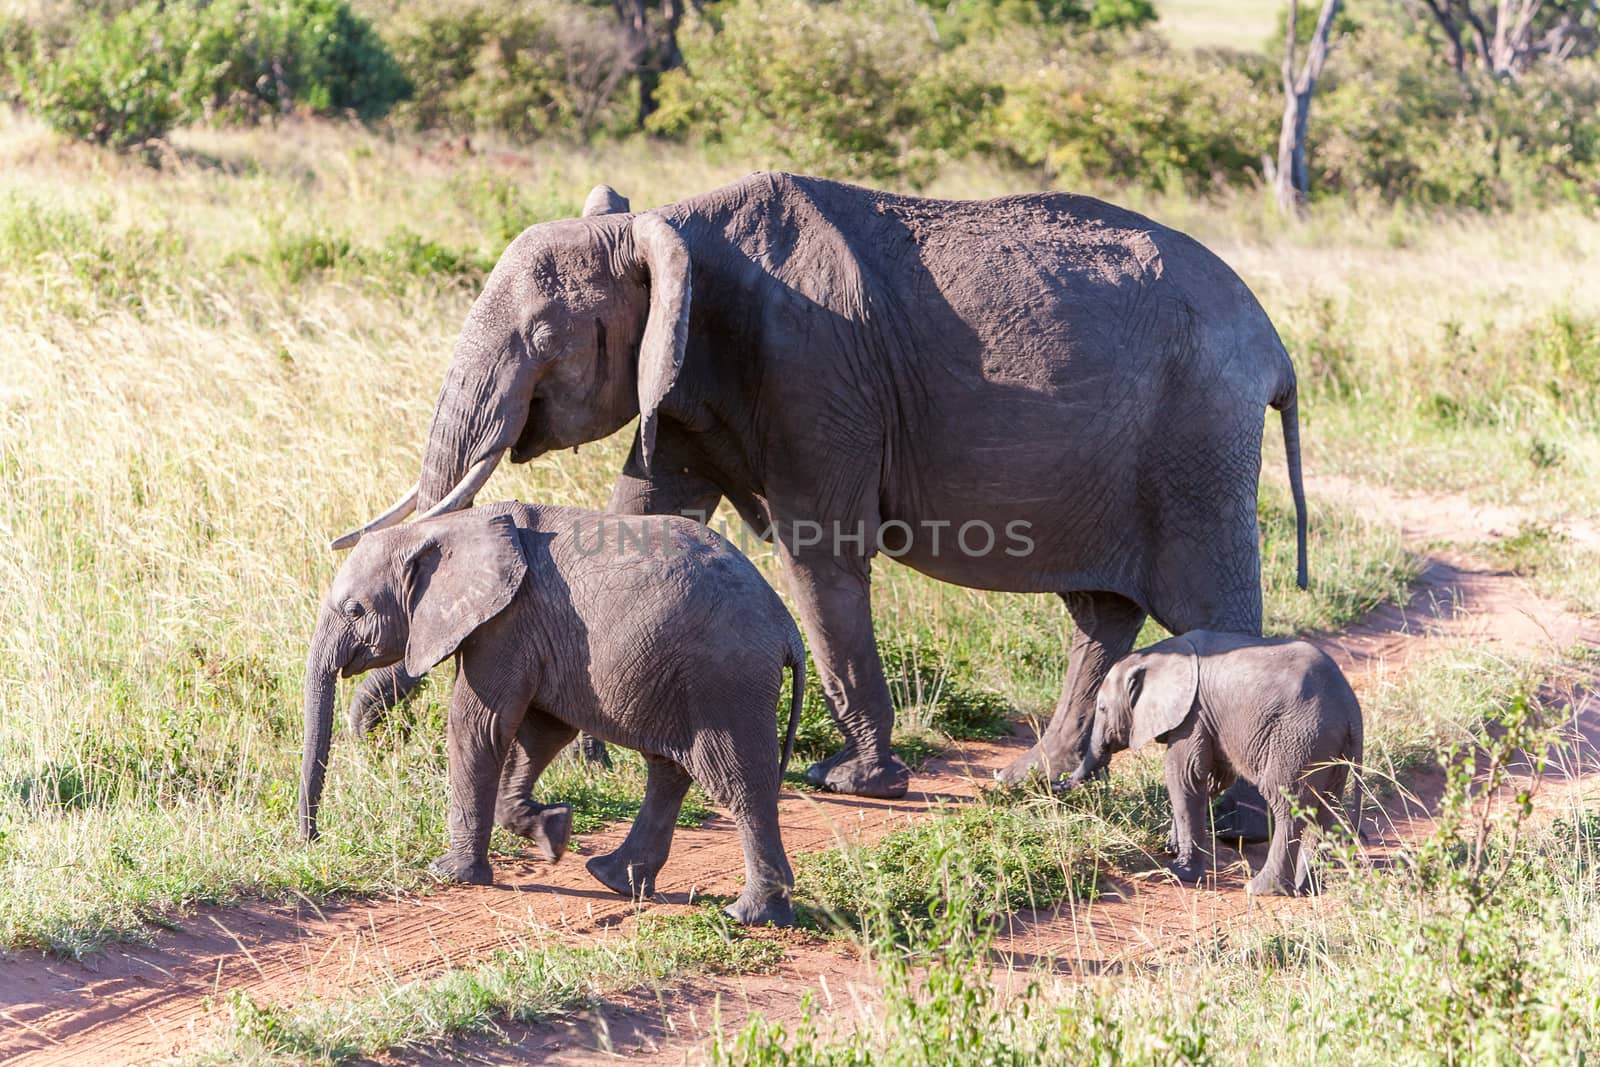 African elephant family walking in the savanna